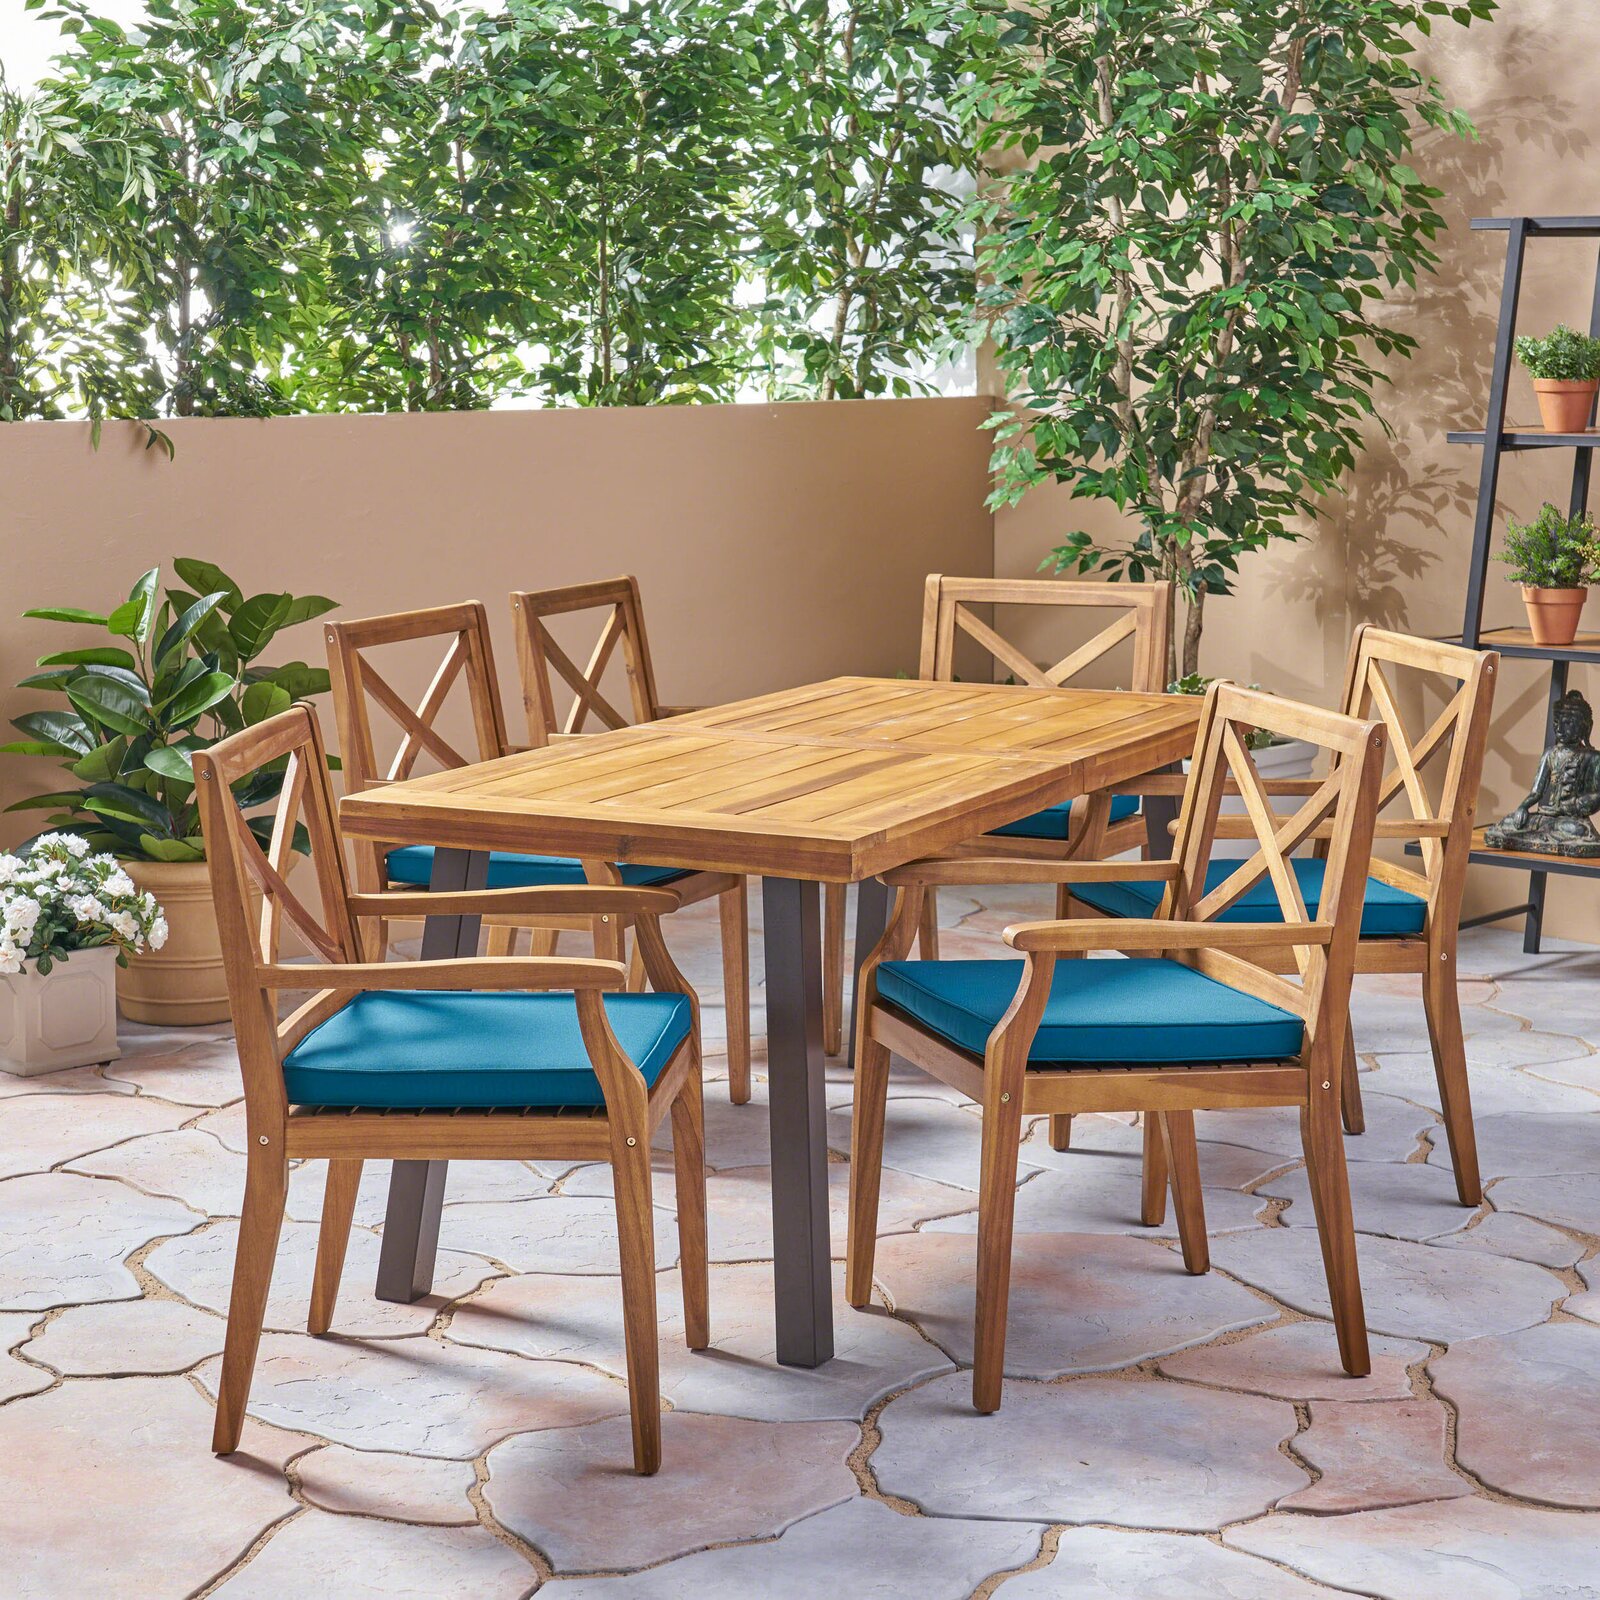 Whalan Outdoor 7 Piece Dining Set with Cushions, Product Weight: 155.4, Pieces Included: 1 Outdoor dining table and 6 outdoor dining chairs - image 4 of 6